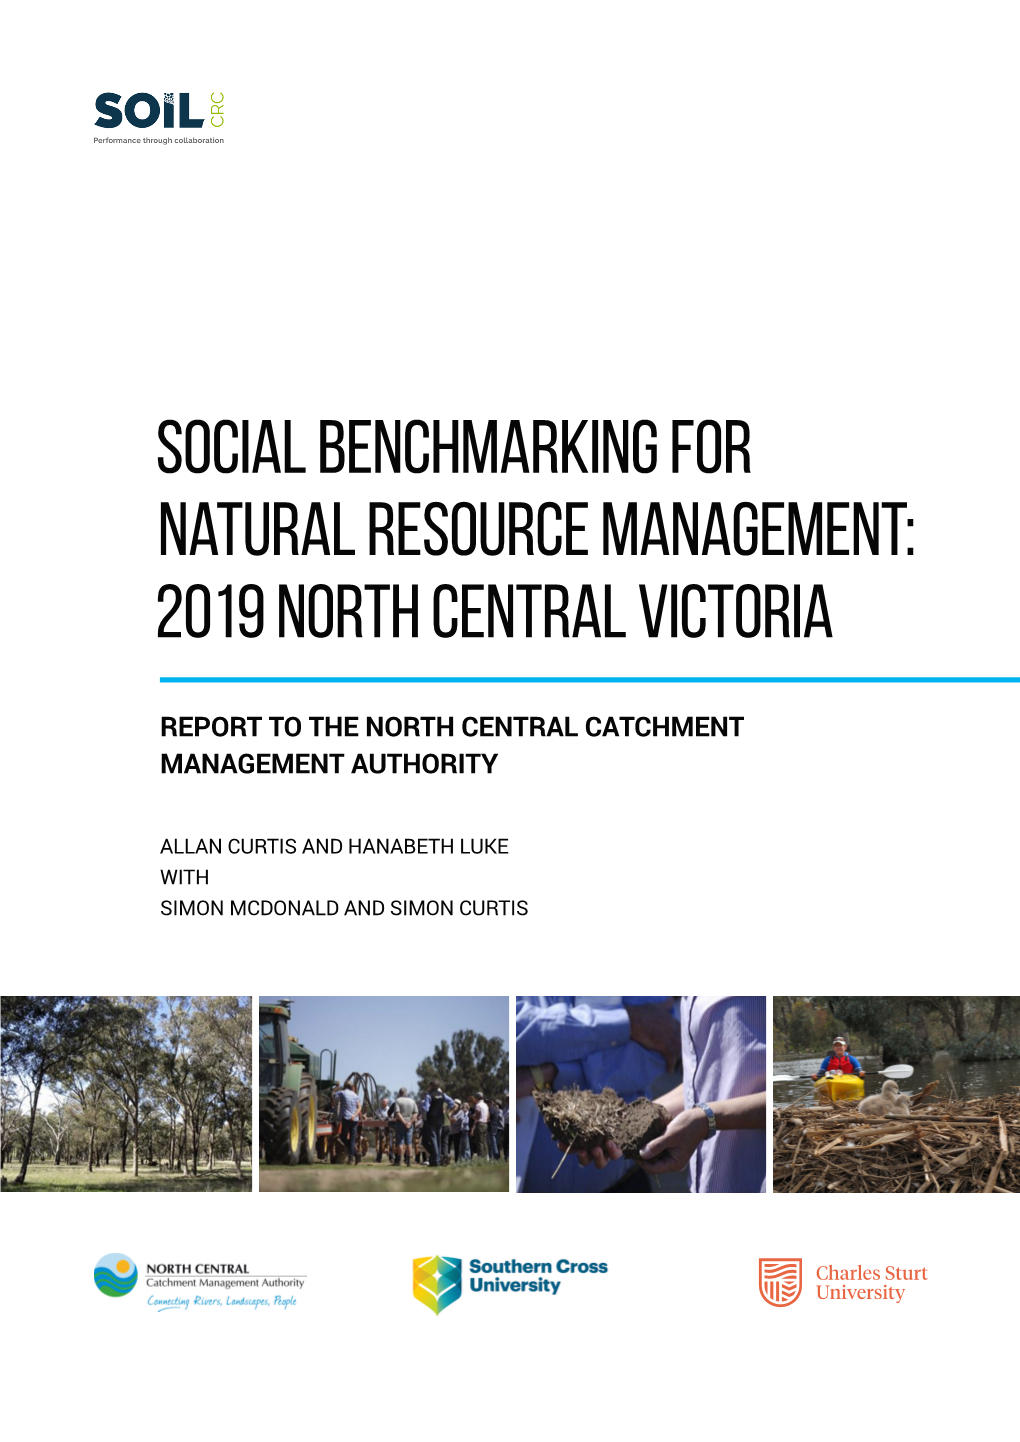 Social Benchmarking Report (North Central Victoria)